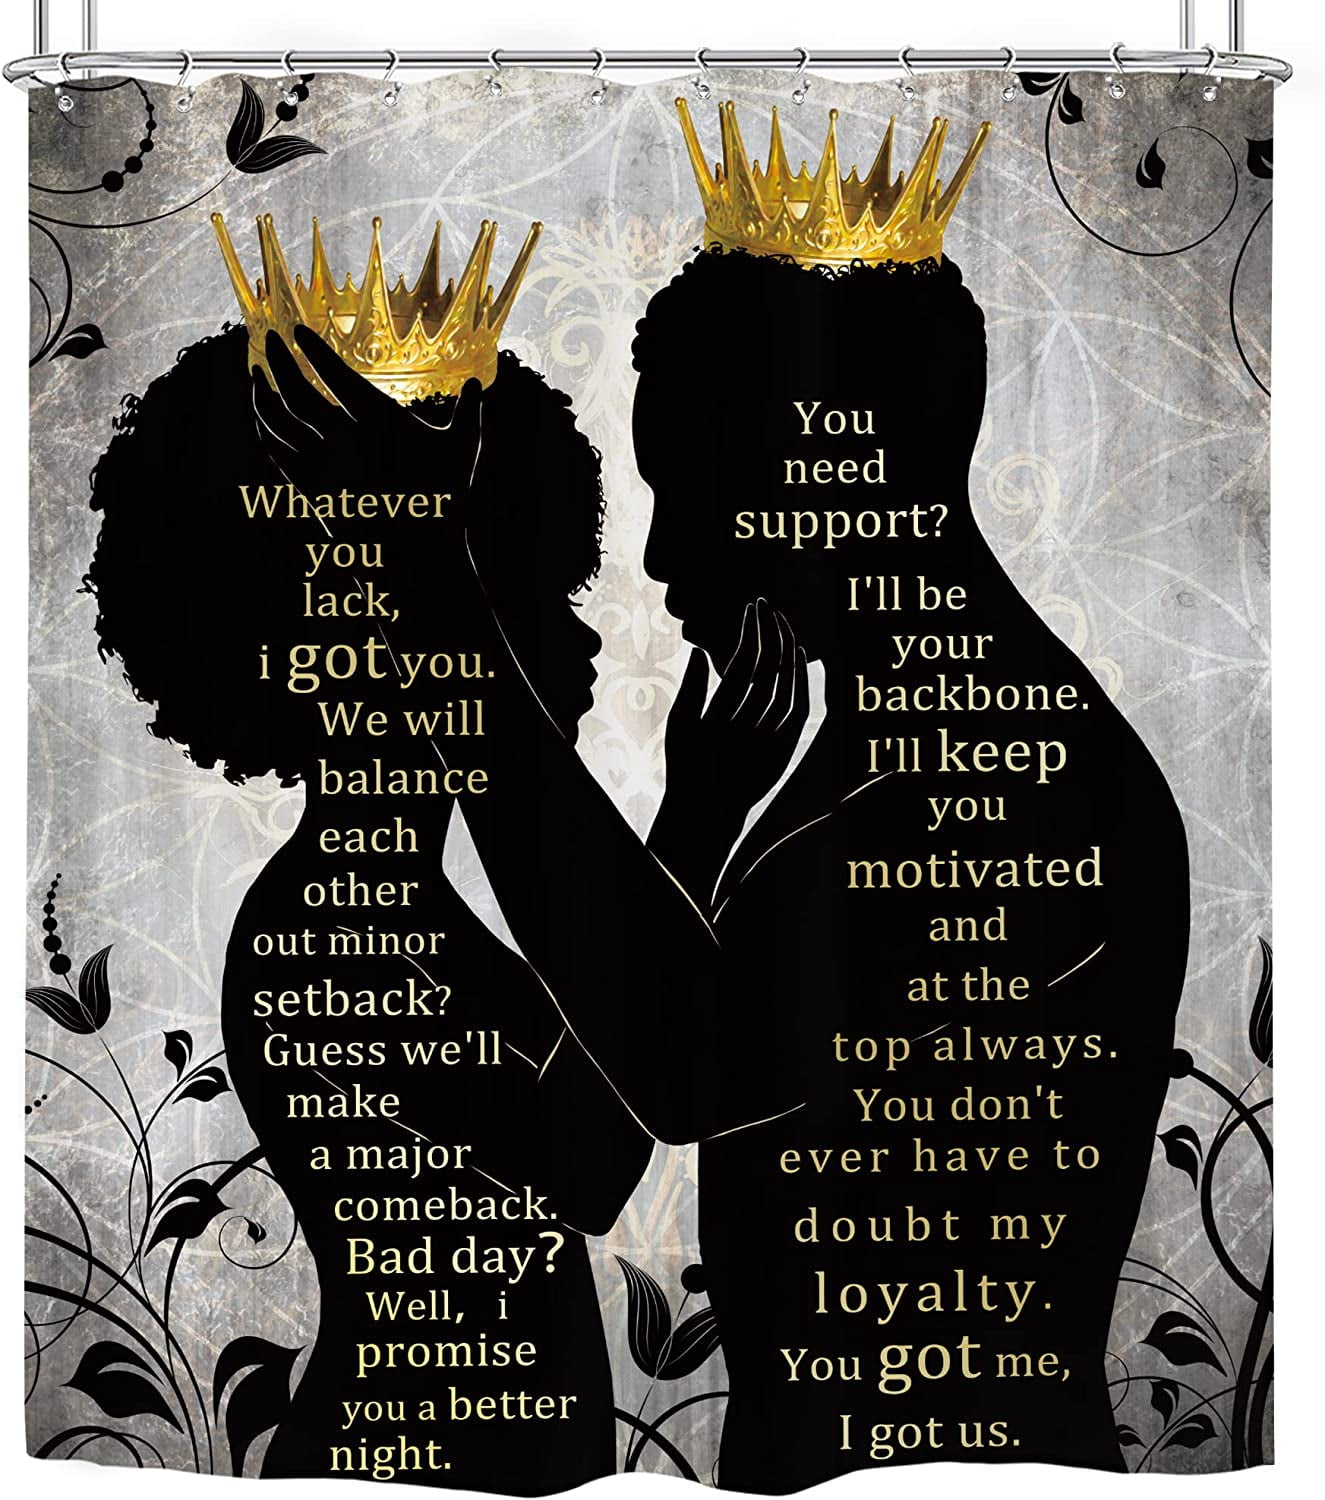 king crown quotes